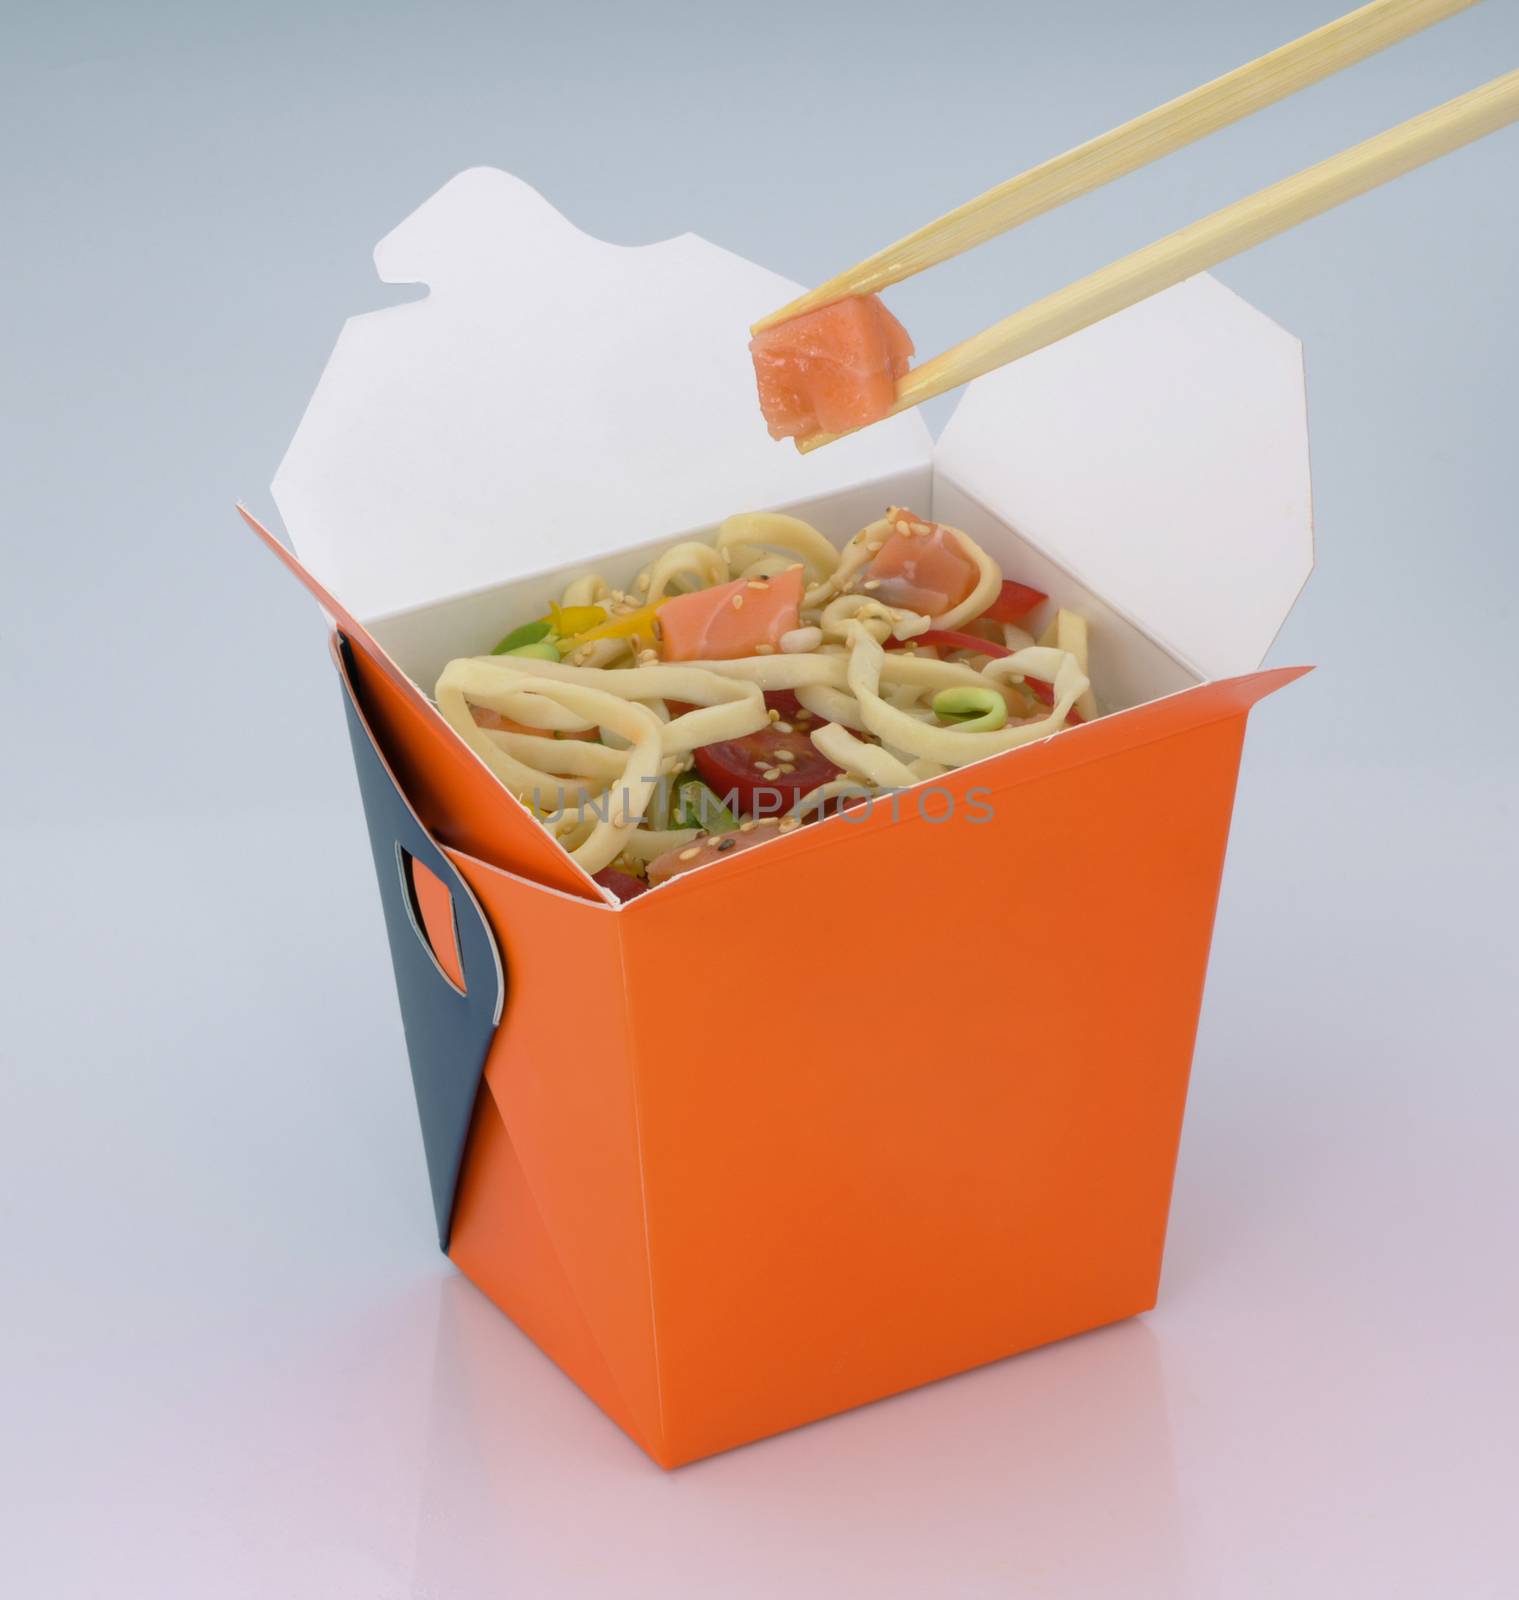 chinese food to takeaway. noodles with meat and vegetables in a cardboard box on a light background. takes chinese food with chopsticks